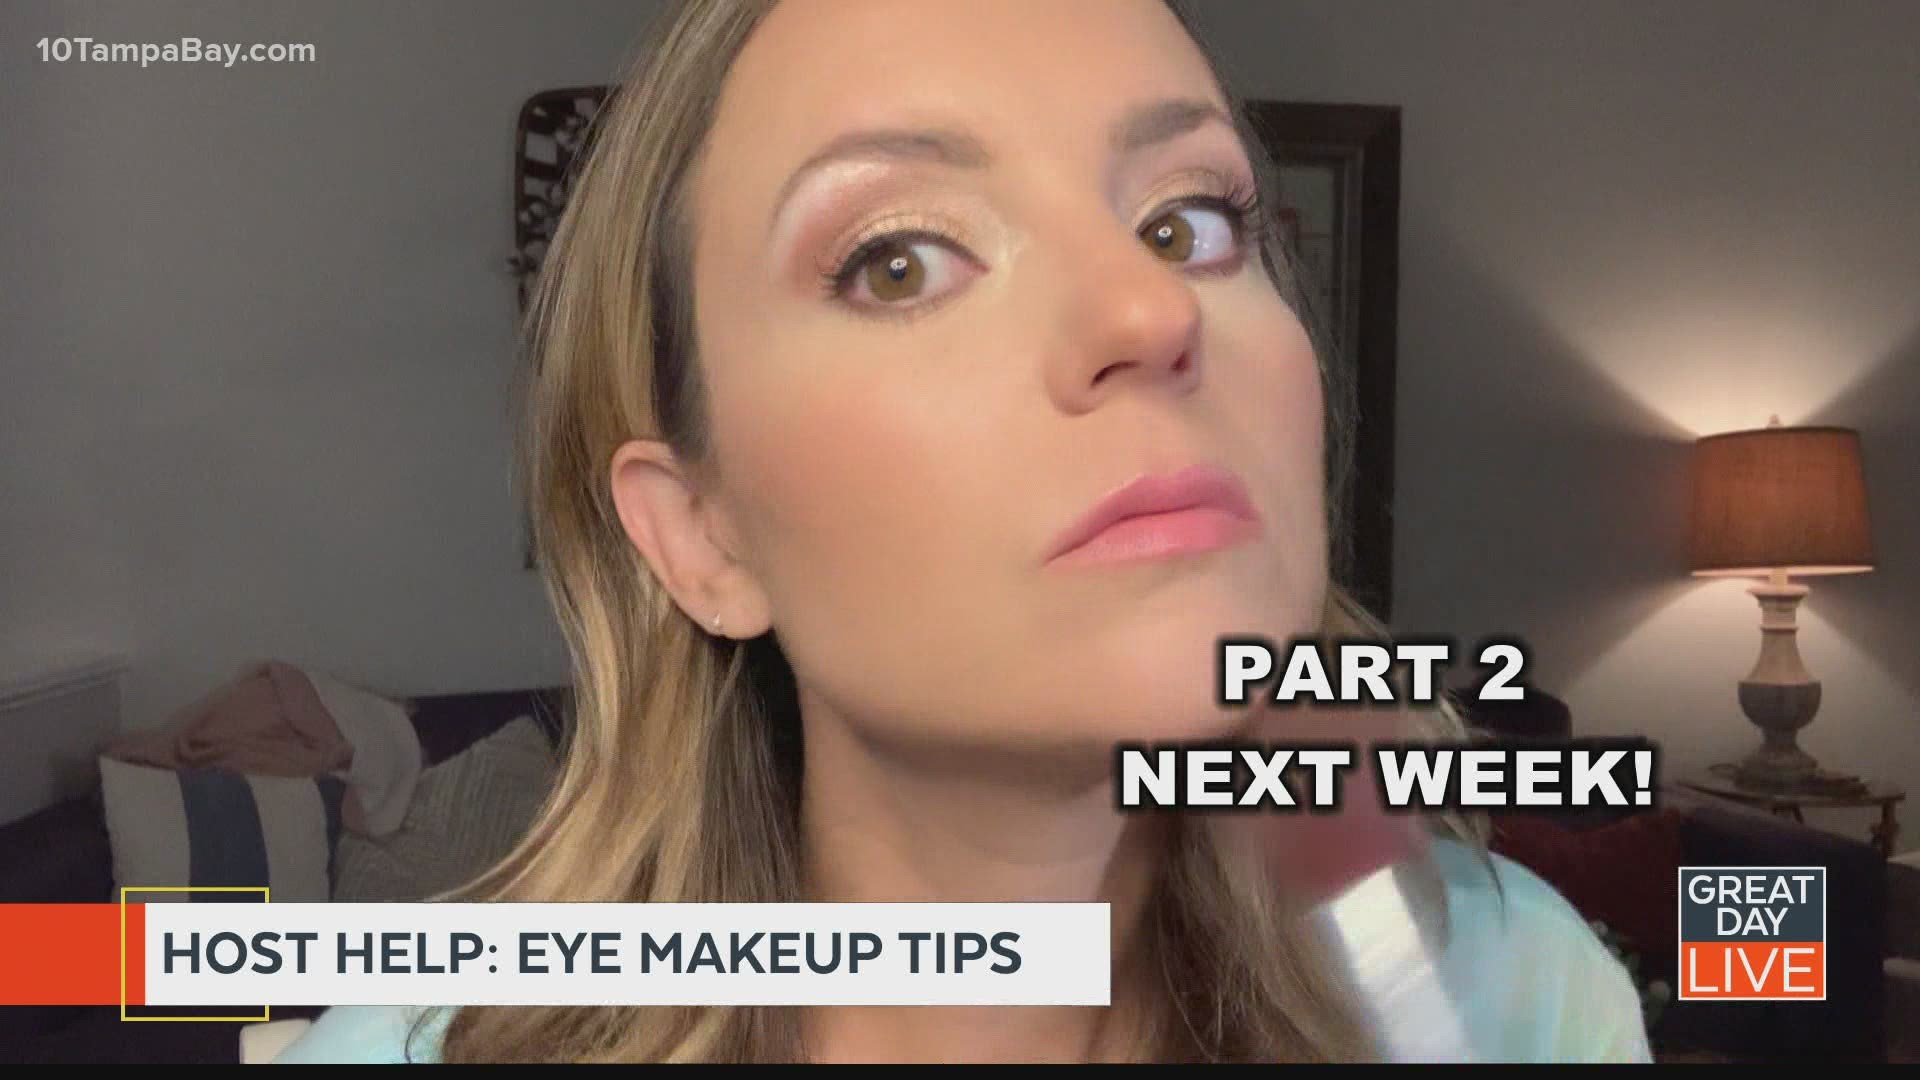 Host Help: Makeup tips to help your eyes pop